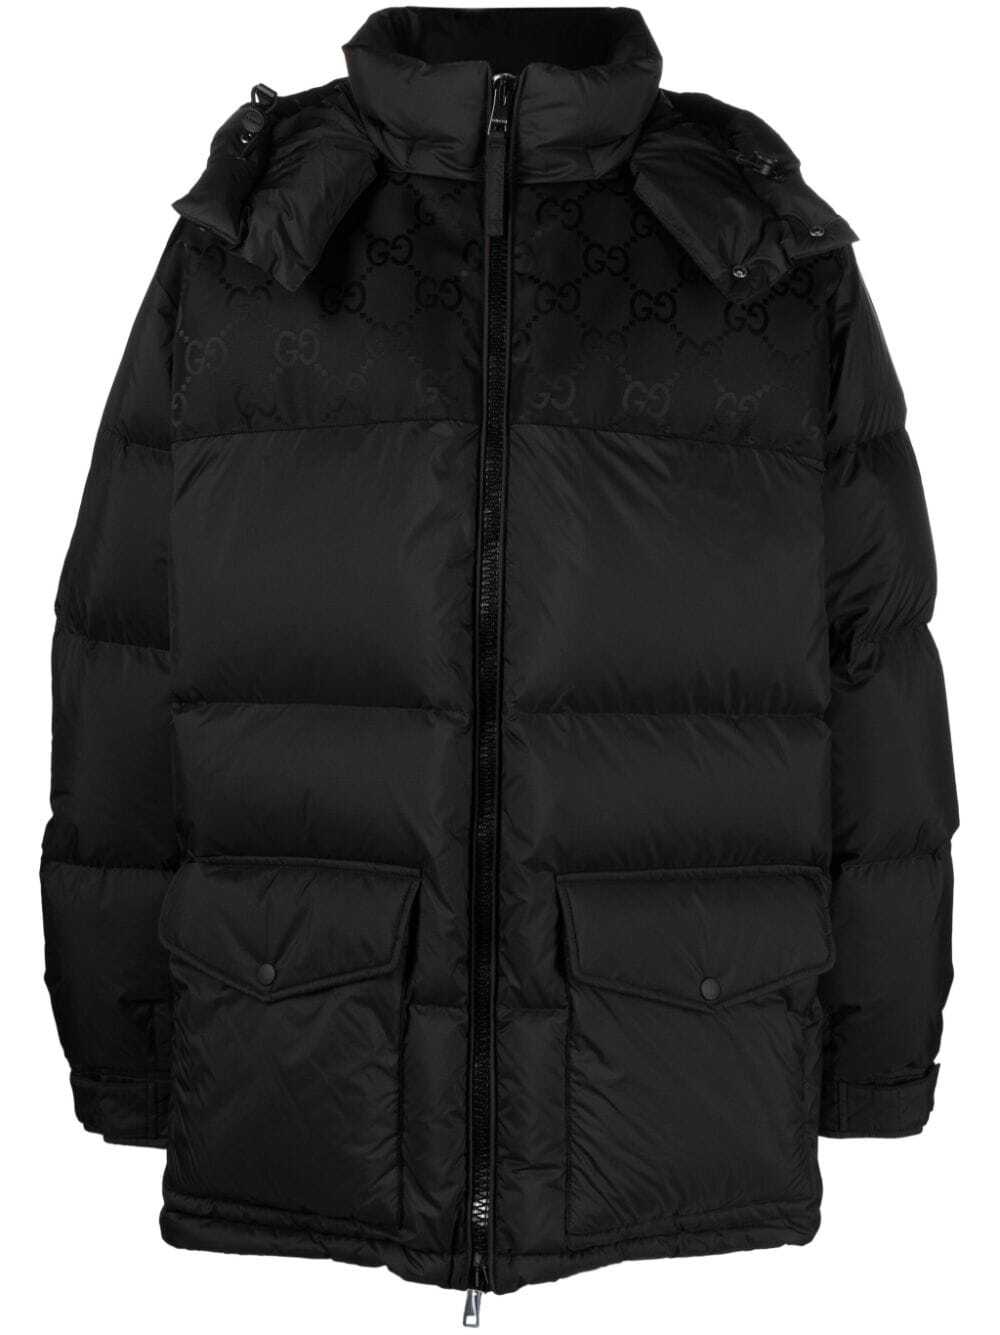 Down jacket with GG inserts